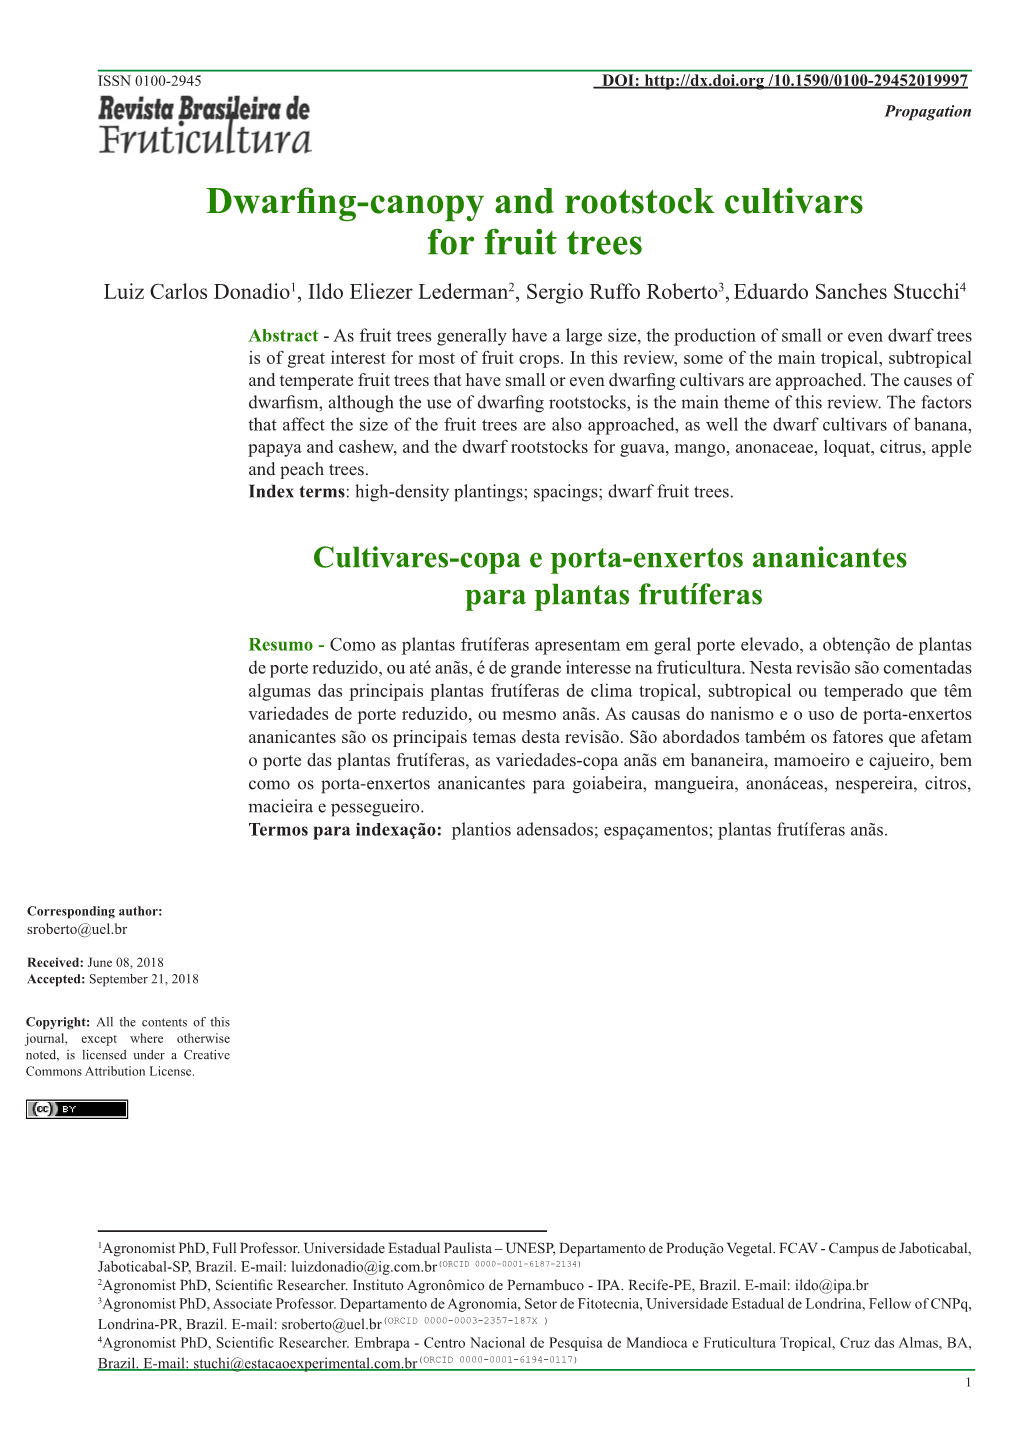 Dwarfing-Canopy and Rootstock Cultivars for Fruit Trees